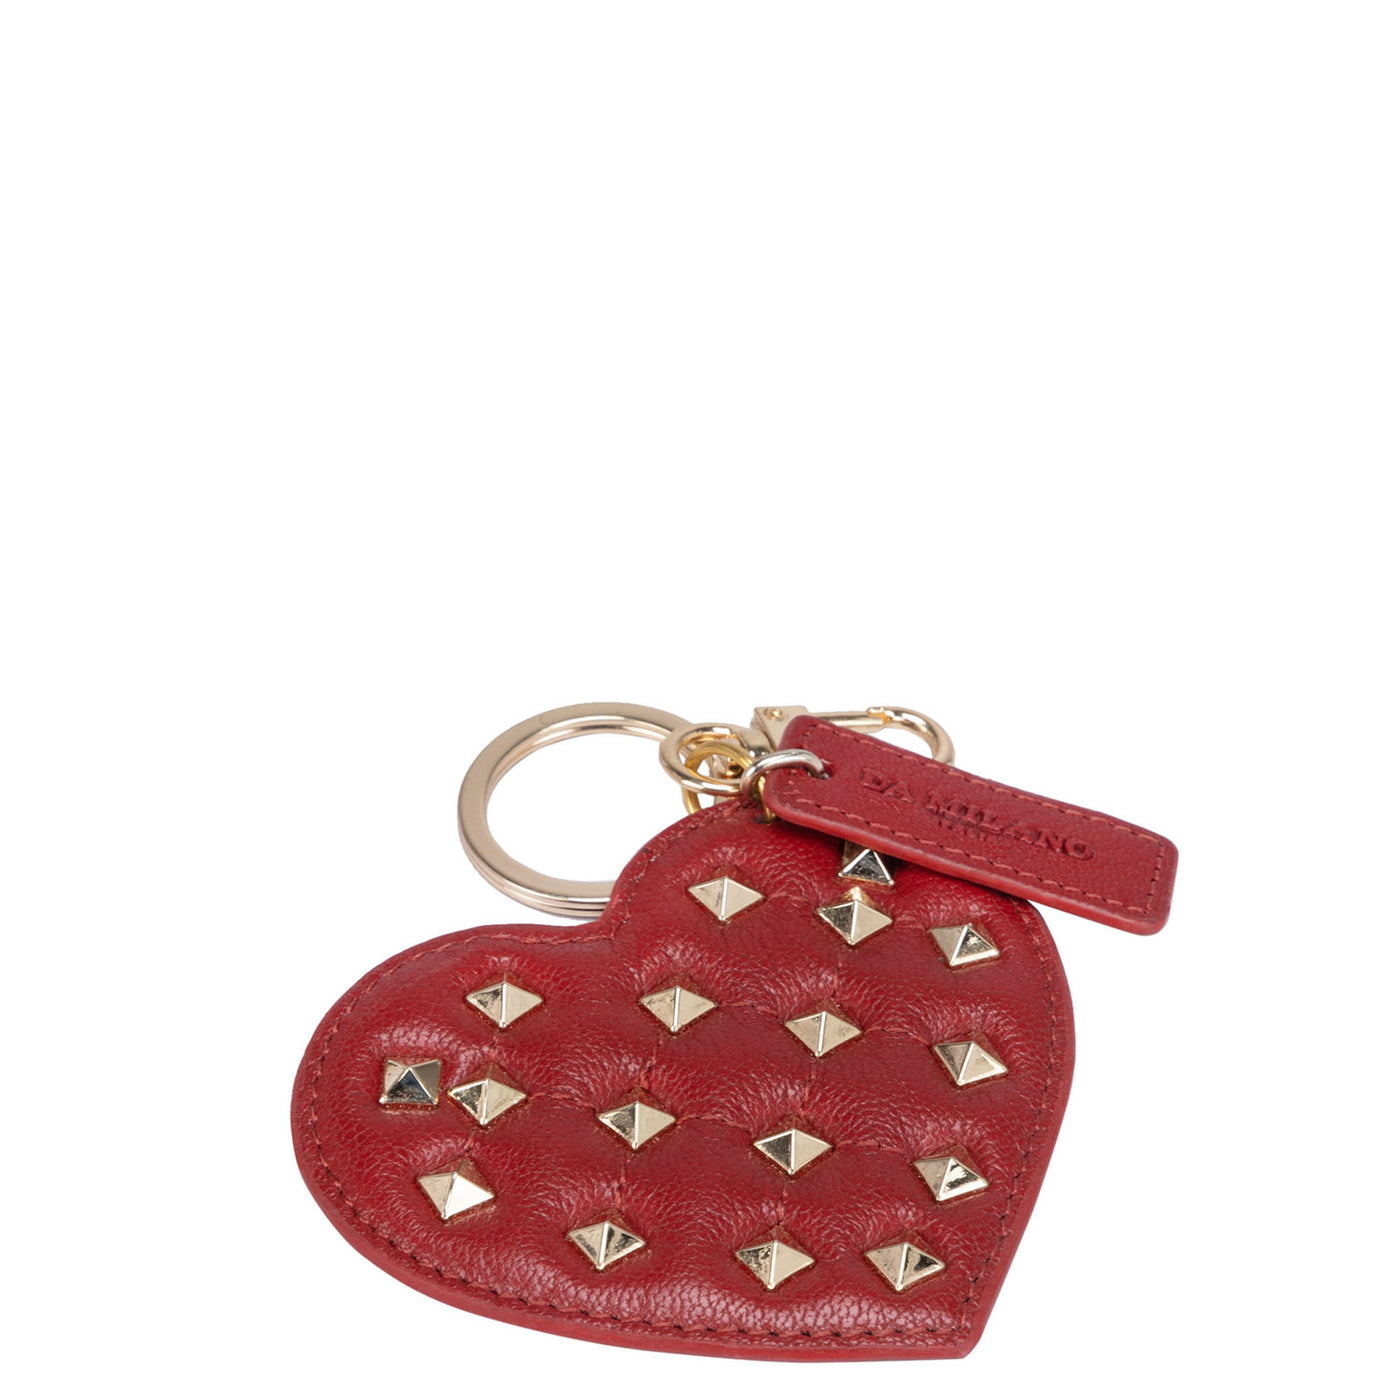 Quilting Leather Key Chain - Tomato